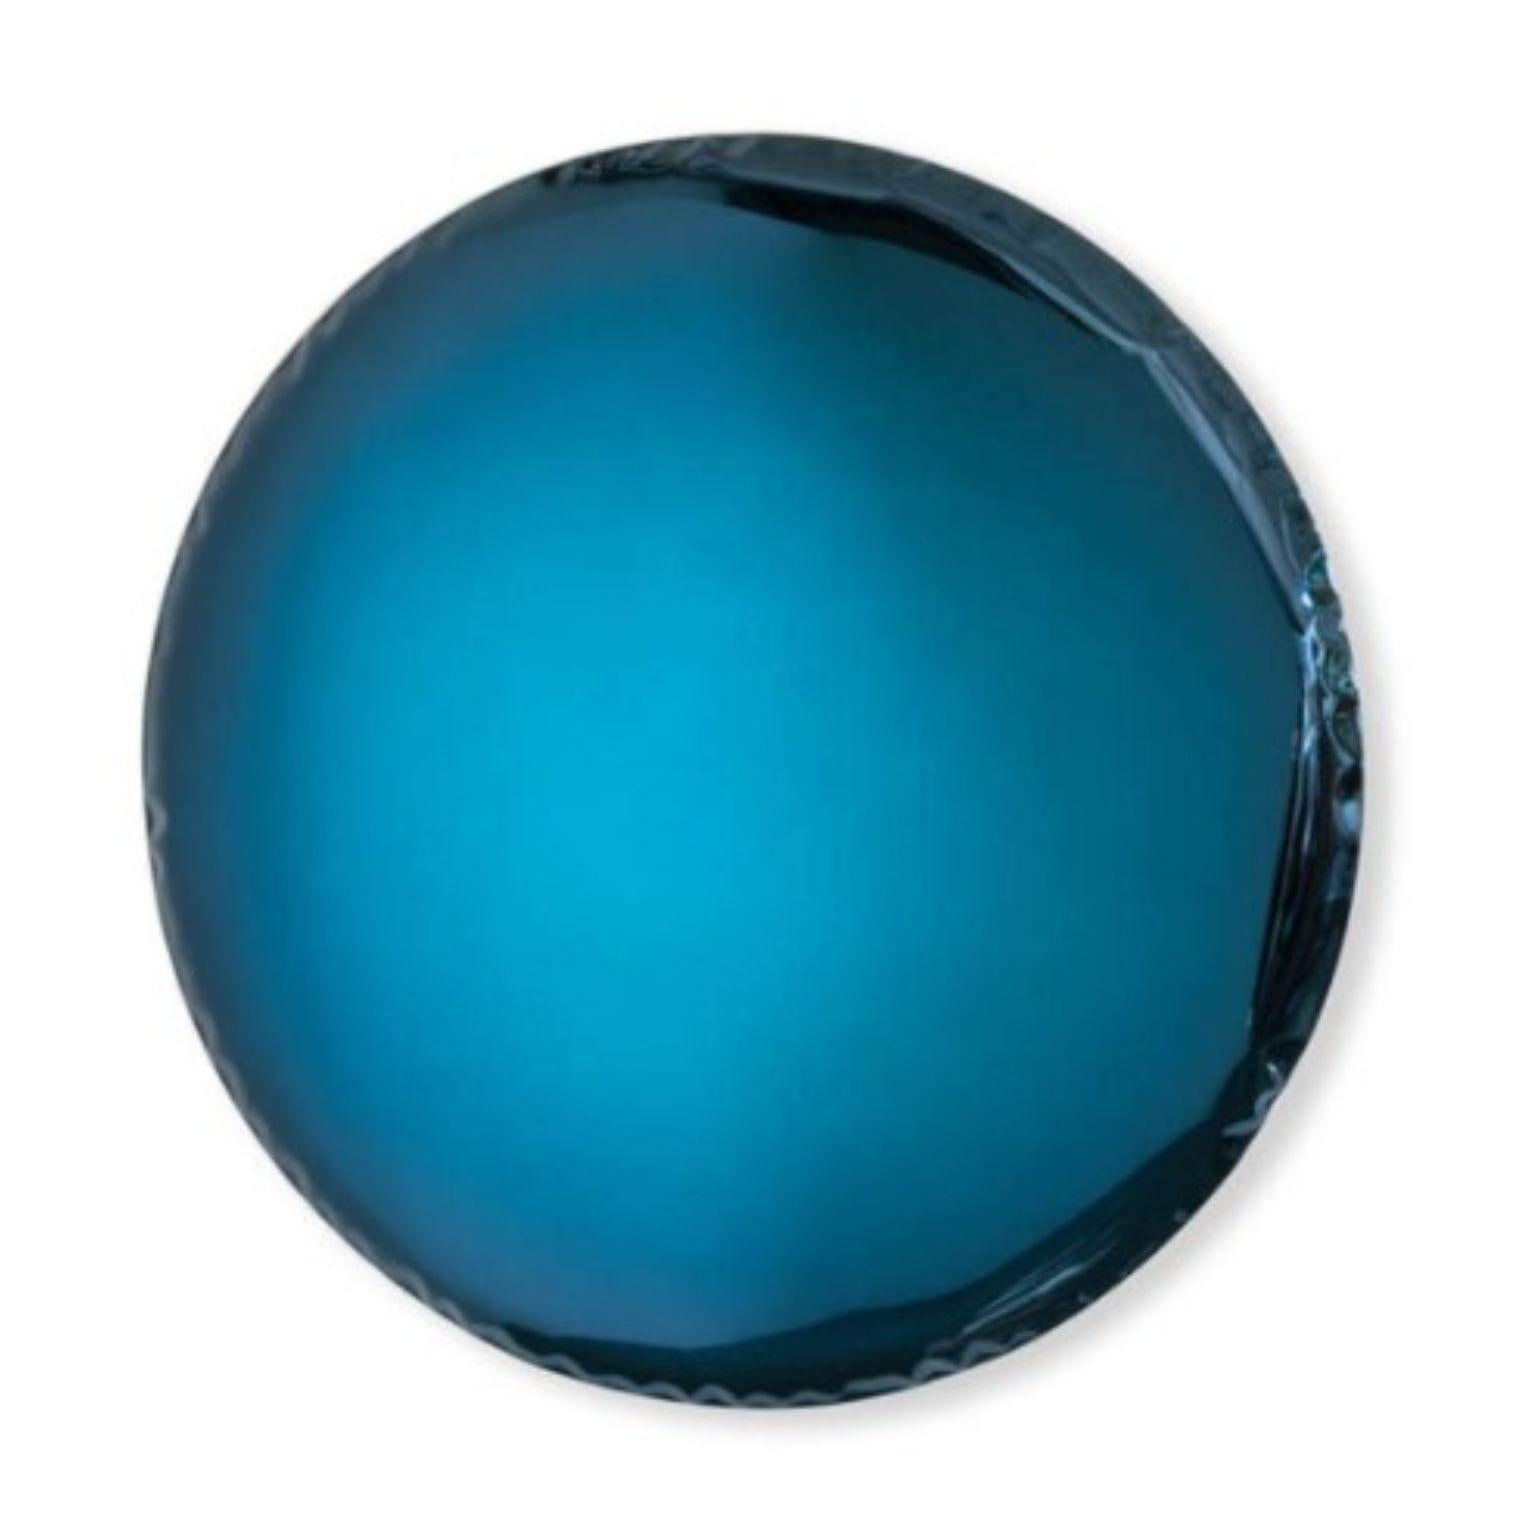 Deep Space Blue Oko 36 sculptural wall mirror by Zieta
Dimensions: Diameter 36 x D 6 cm 
Material: Stainless steel. 
Finish: Deep Space Blue.
Available in finishes: Stainless Steel, Deep Space Blue, Emerald, Sapphire, Sapphire/Emerald, Dark Matter,